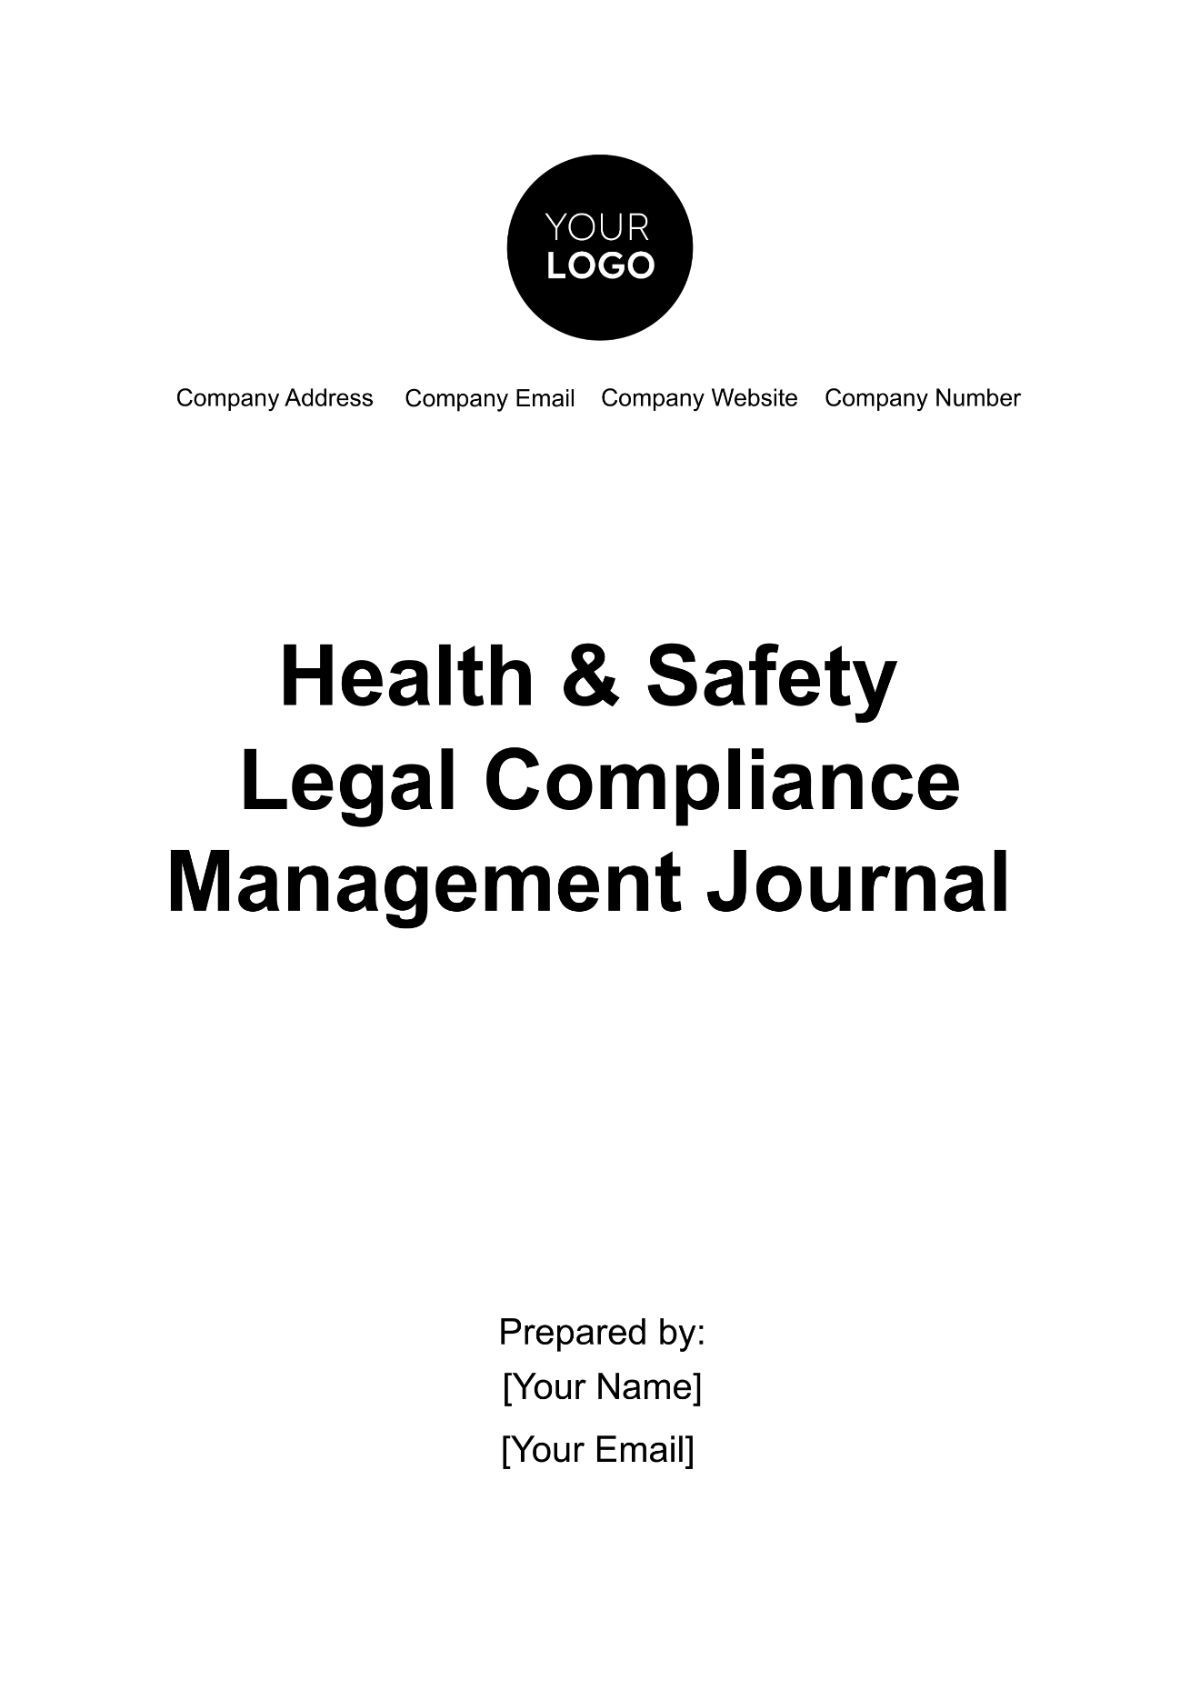 Free Health & Safety Legal Compliance Management Journal Template